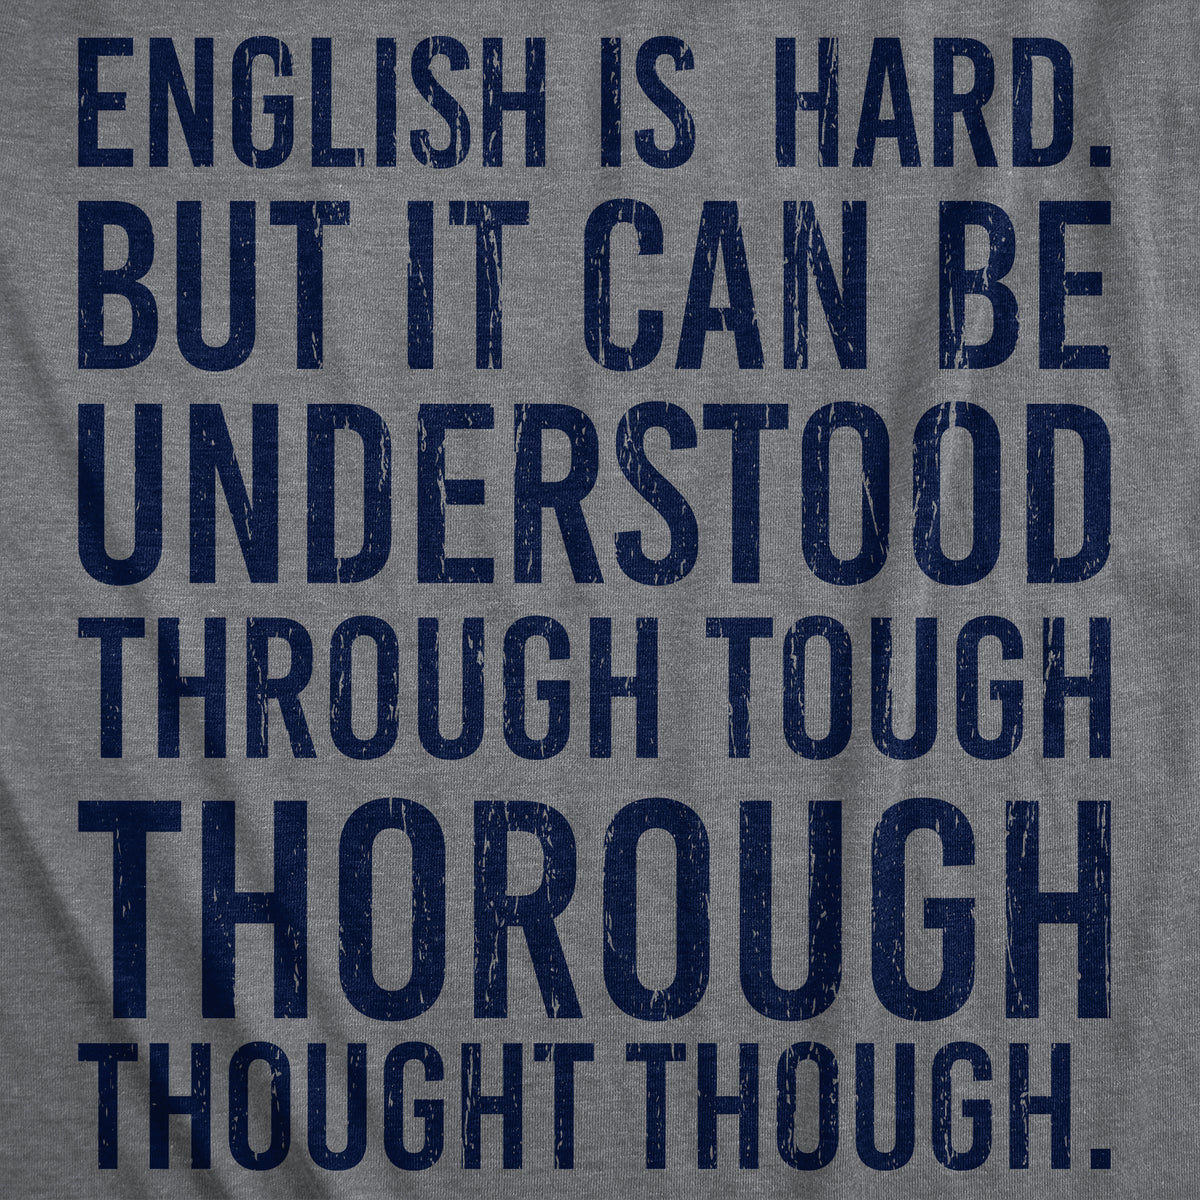 English Is Hard But It Can Be Understood Through Tough Thorough Thought Though Men&#39;s T Shirt